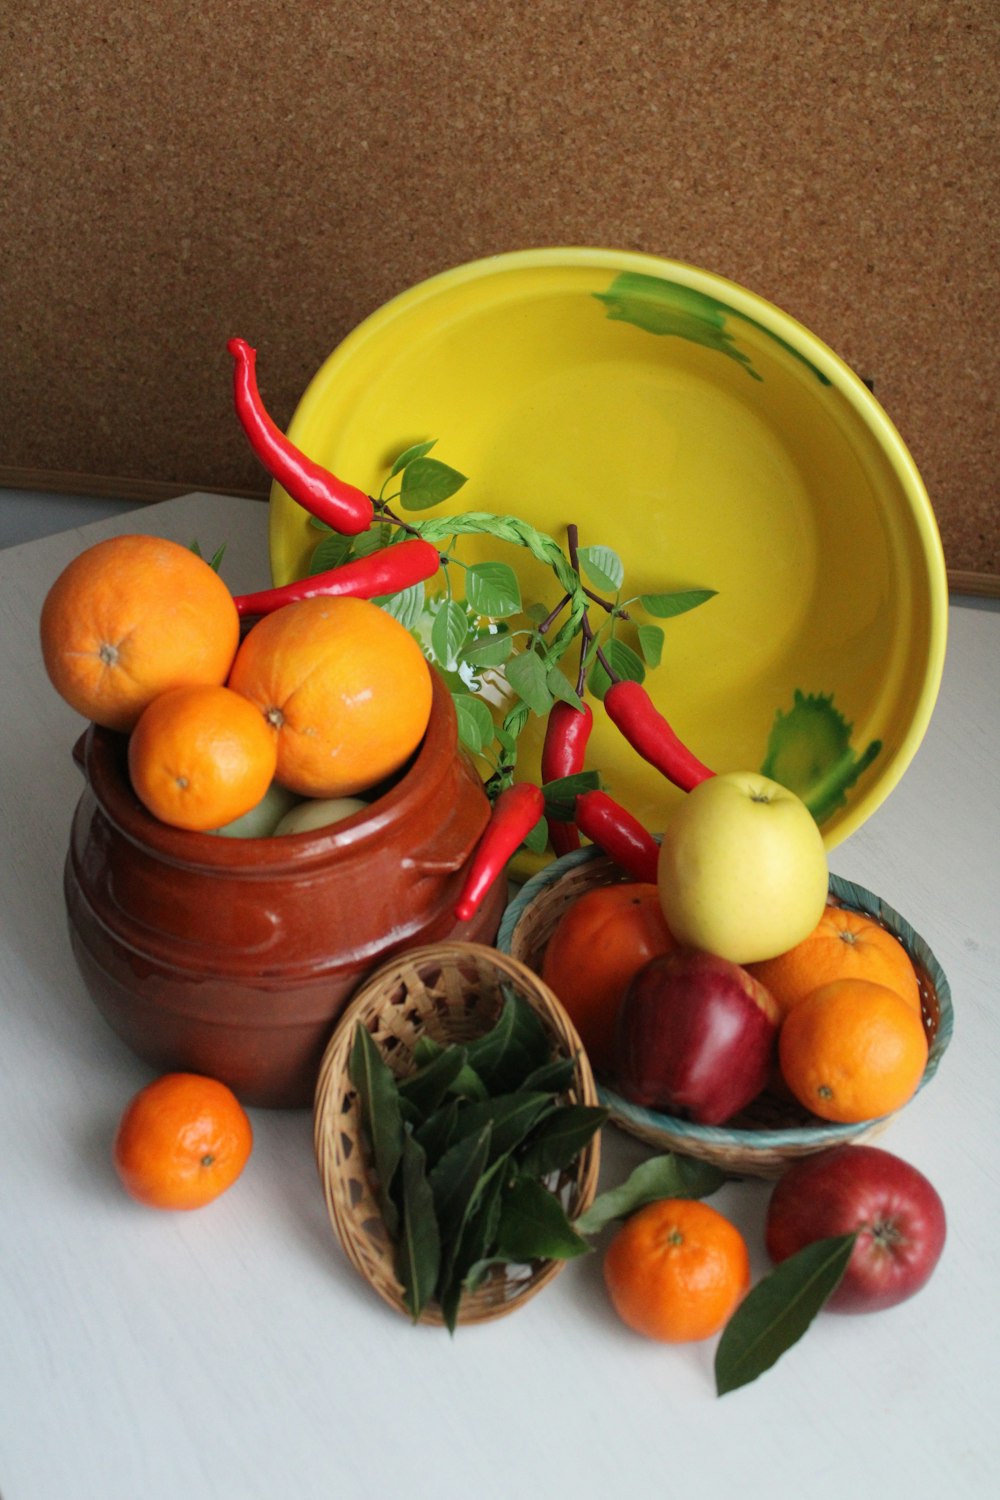 a yellow bowl filled with oranges and other fruit